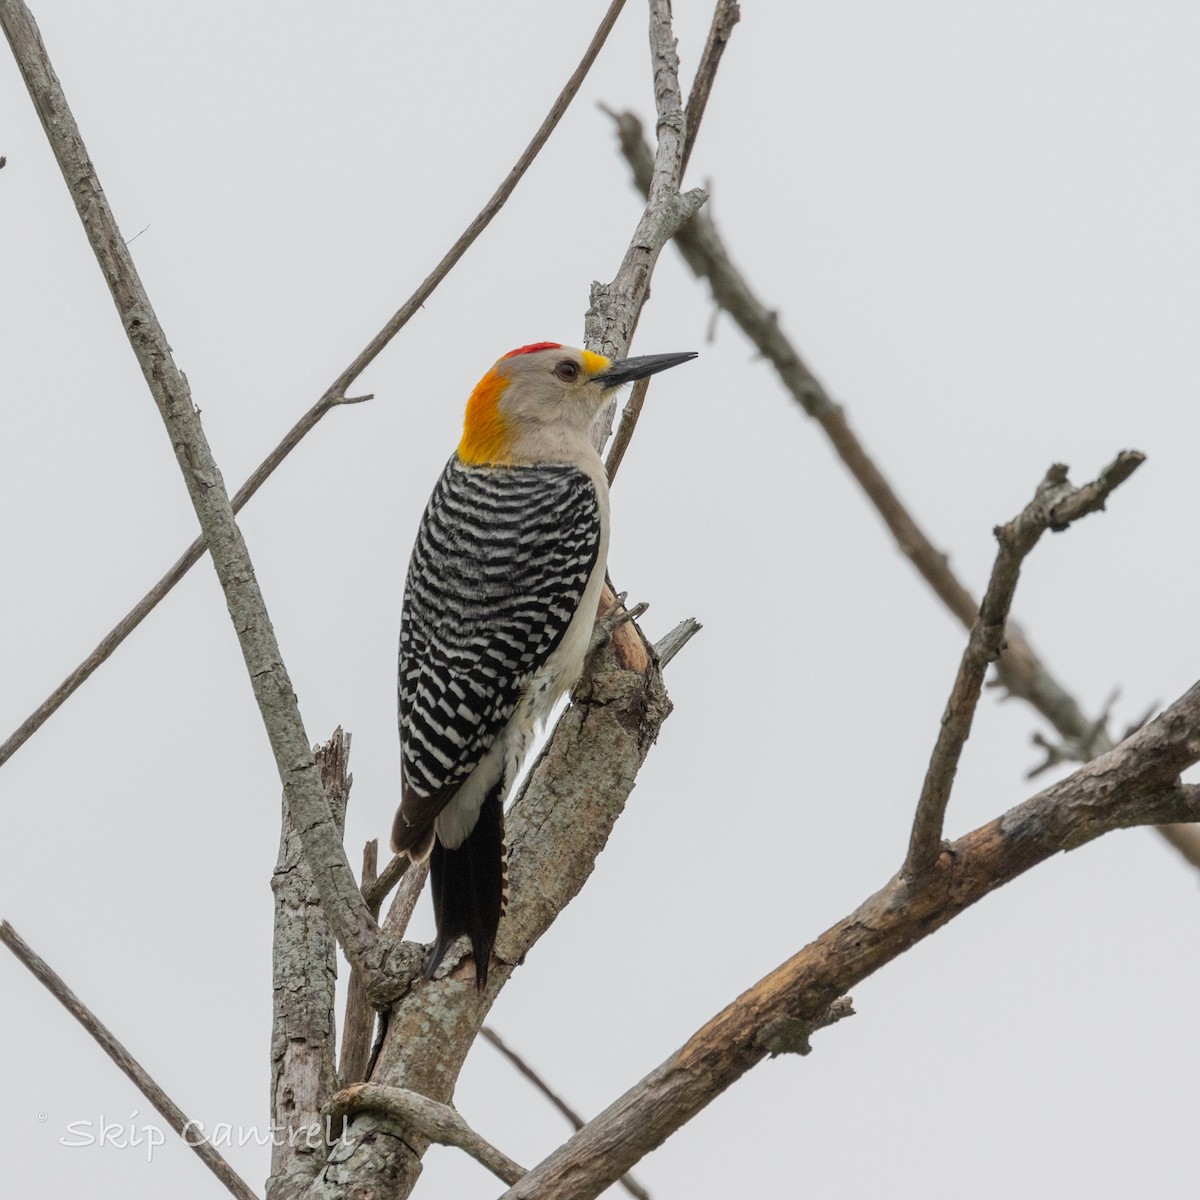 Golden-fronted Woodpecker - Skip Cantrell